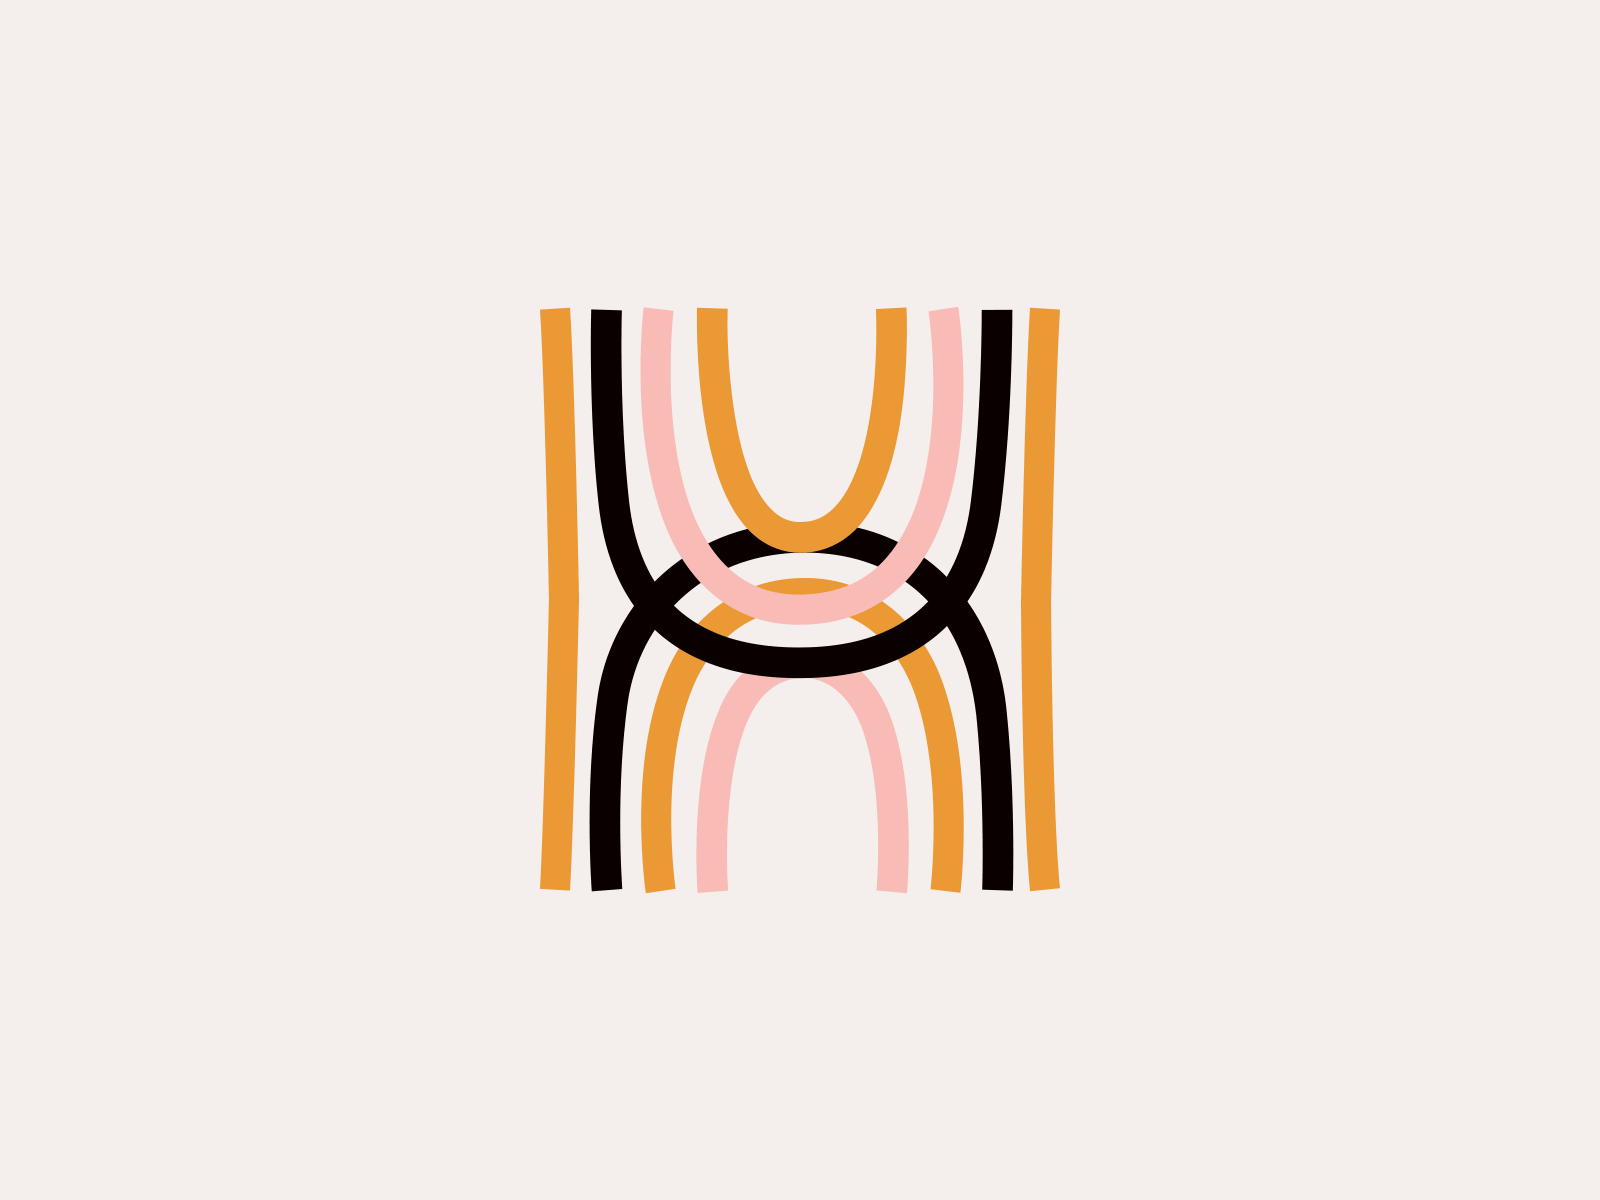 #36daysoftype – H 36 days of type 36daysoftype animated animated gif animation art artwork design gif illustration letter letters type type art typography vector